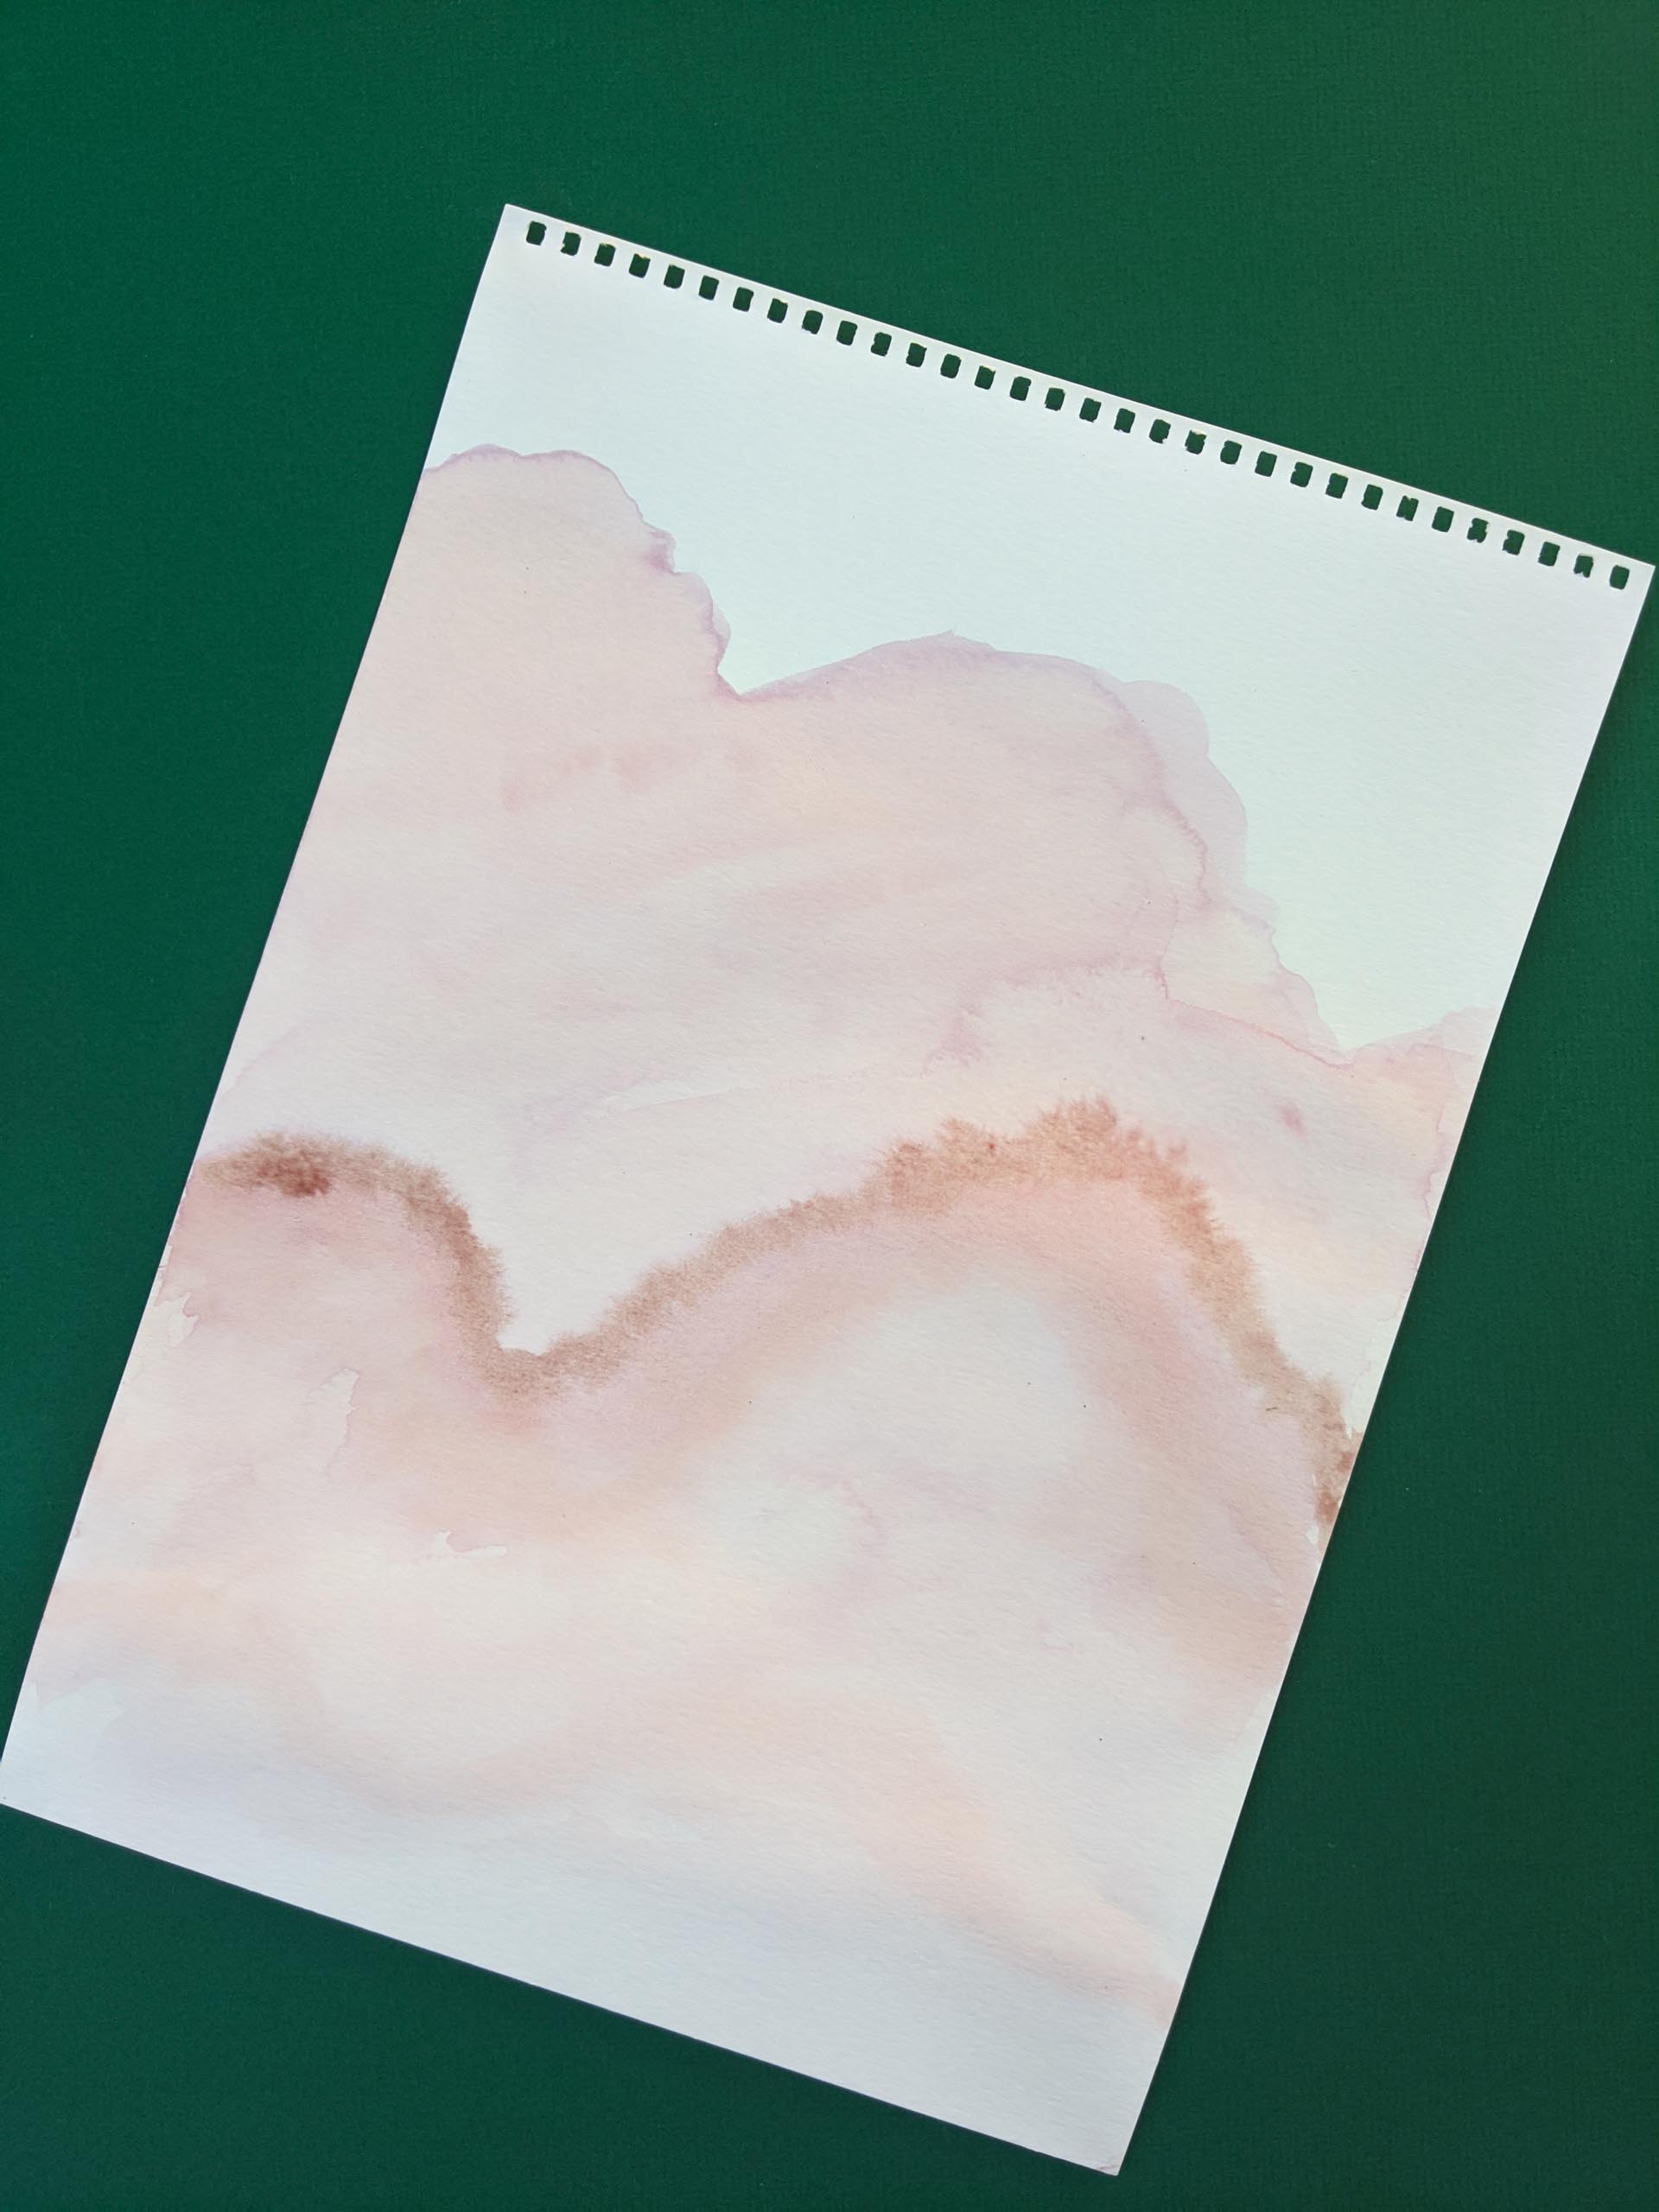 A watercolor painting comes together